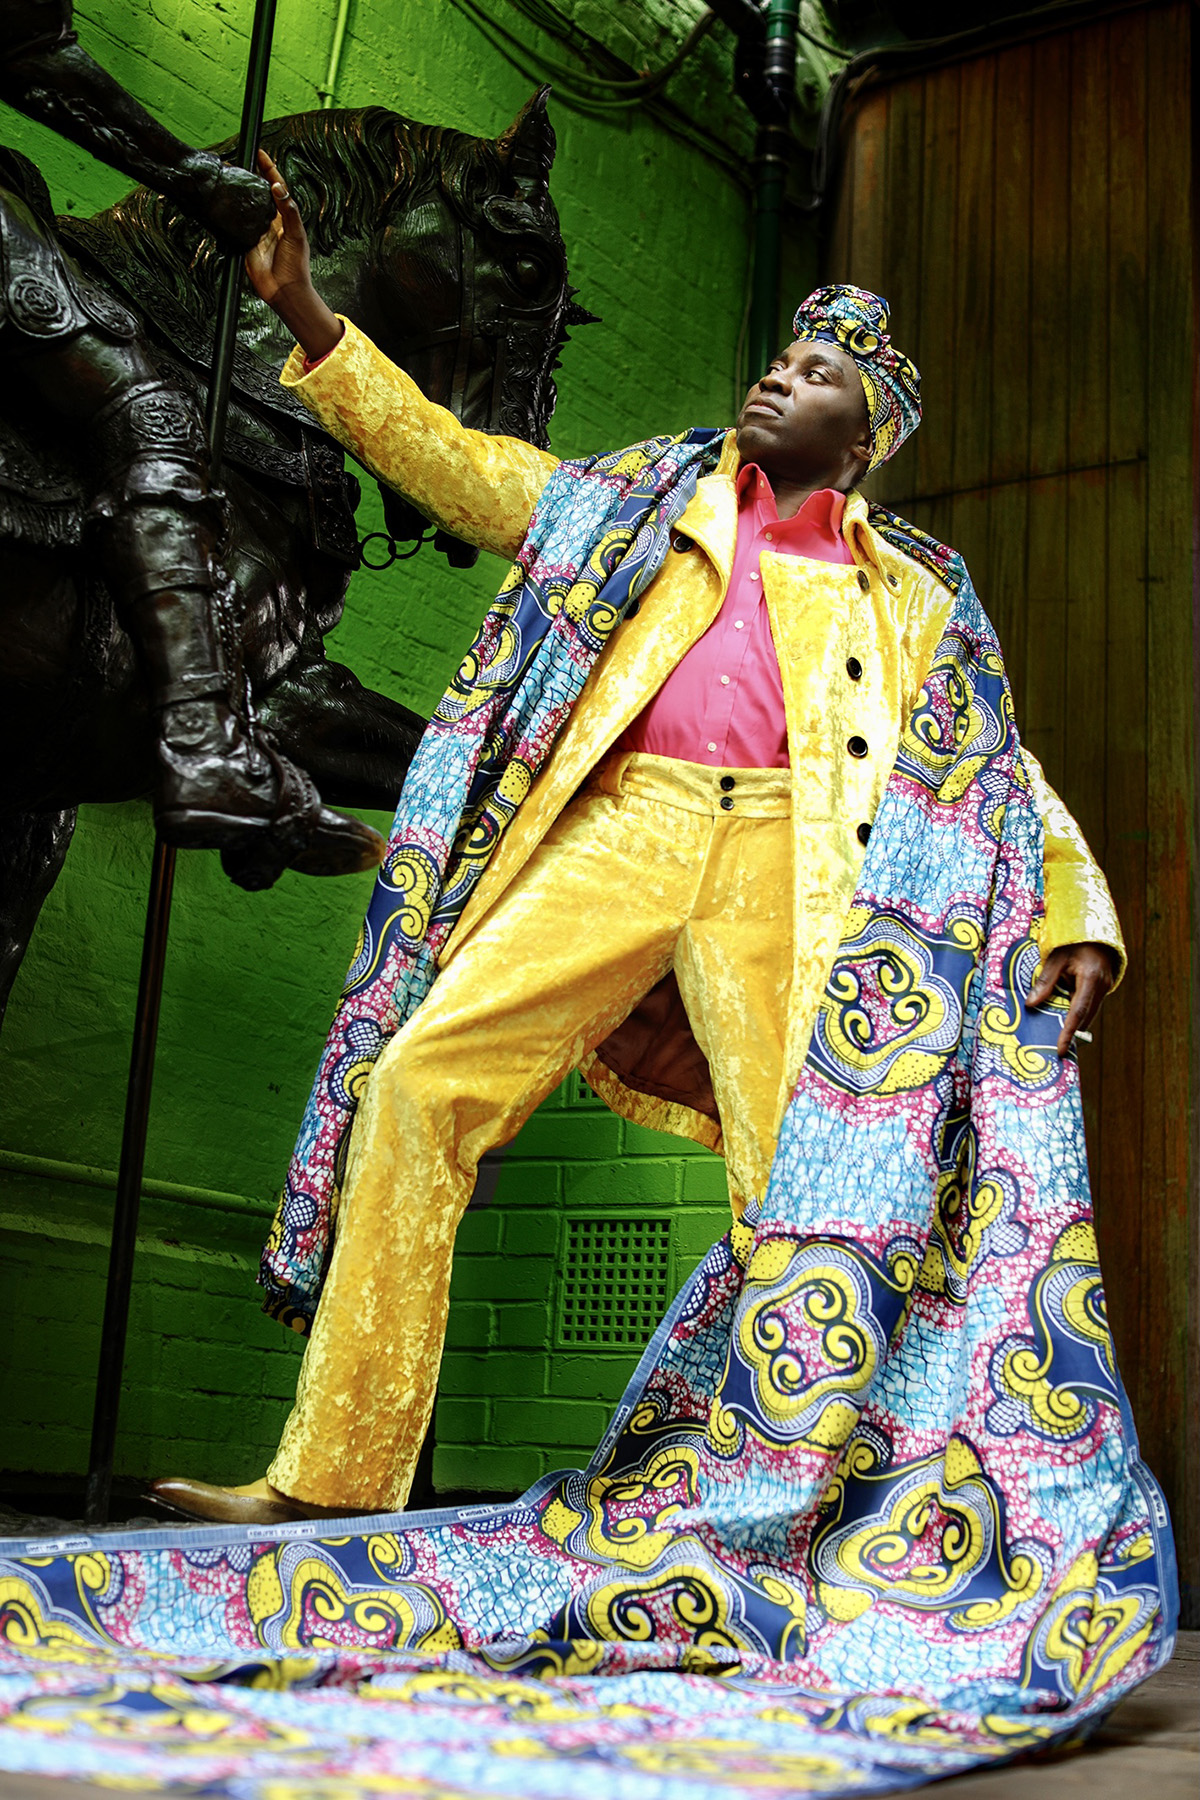 A man in a yellow suit standing by a green wall wearing a long colourful scarf